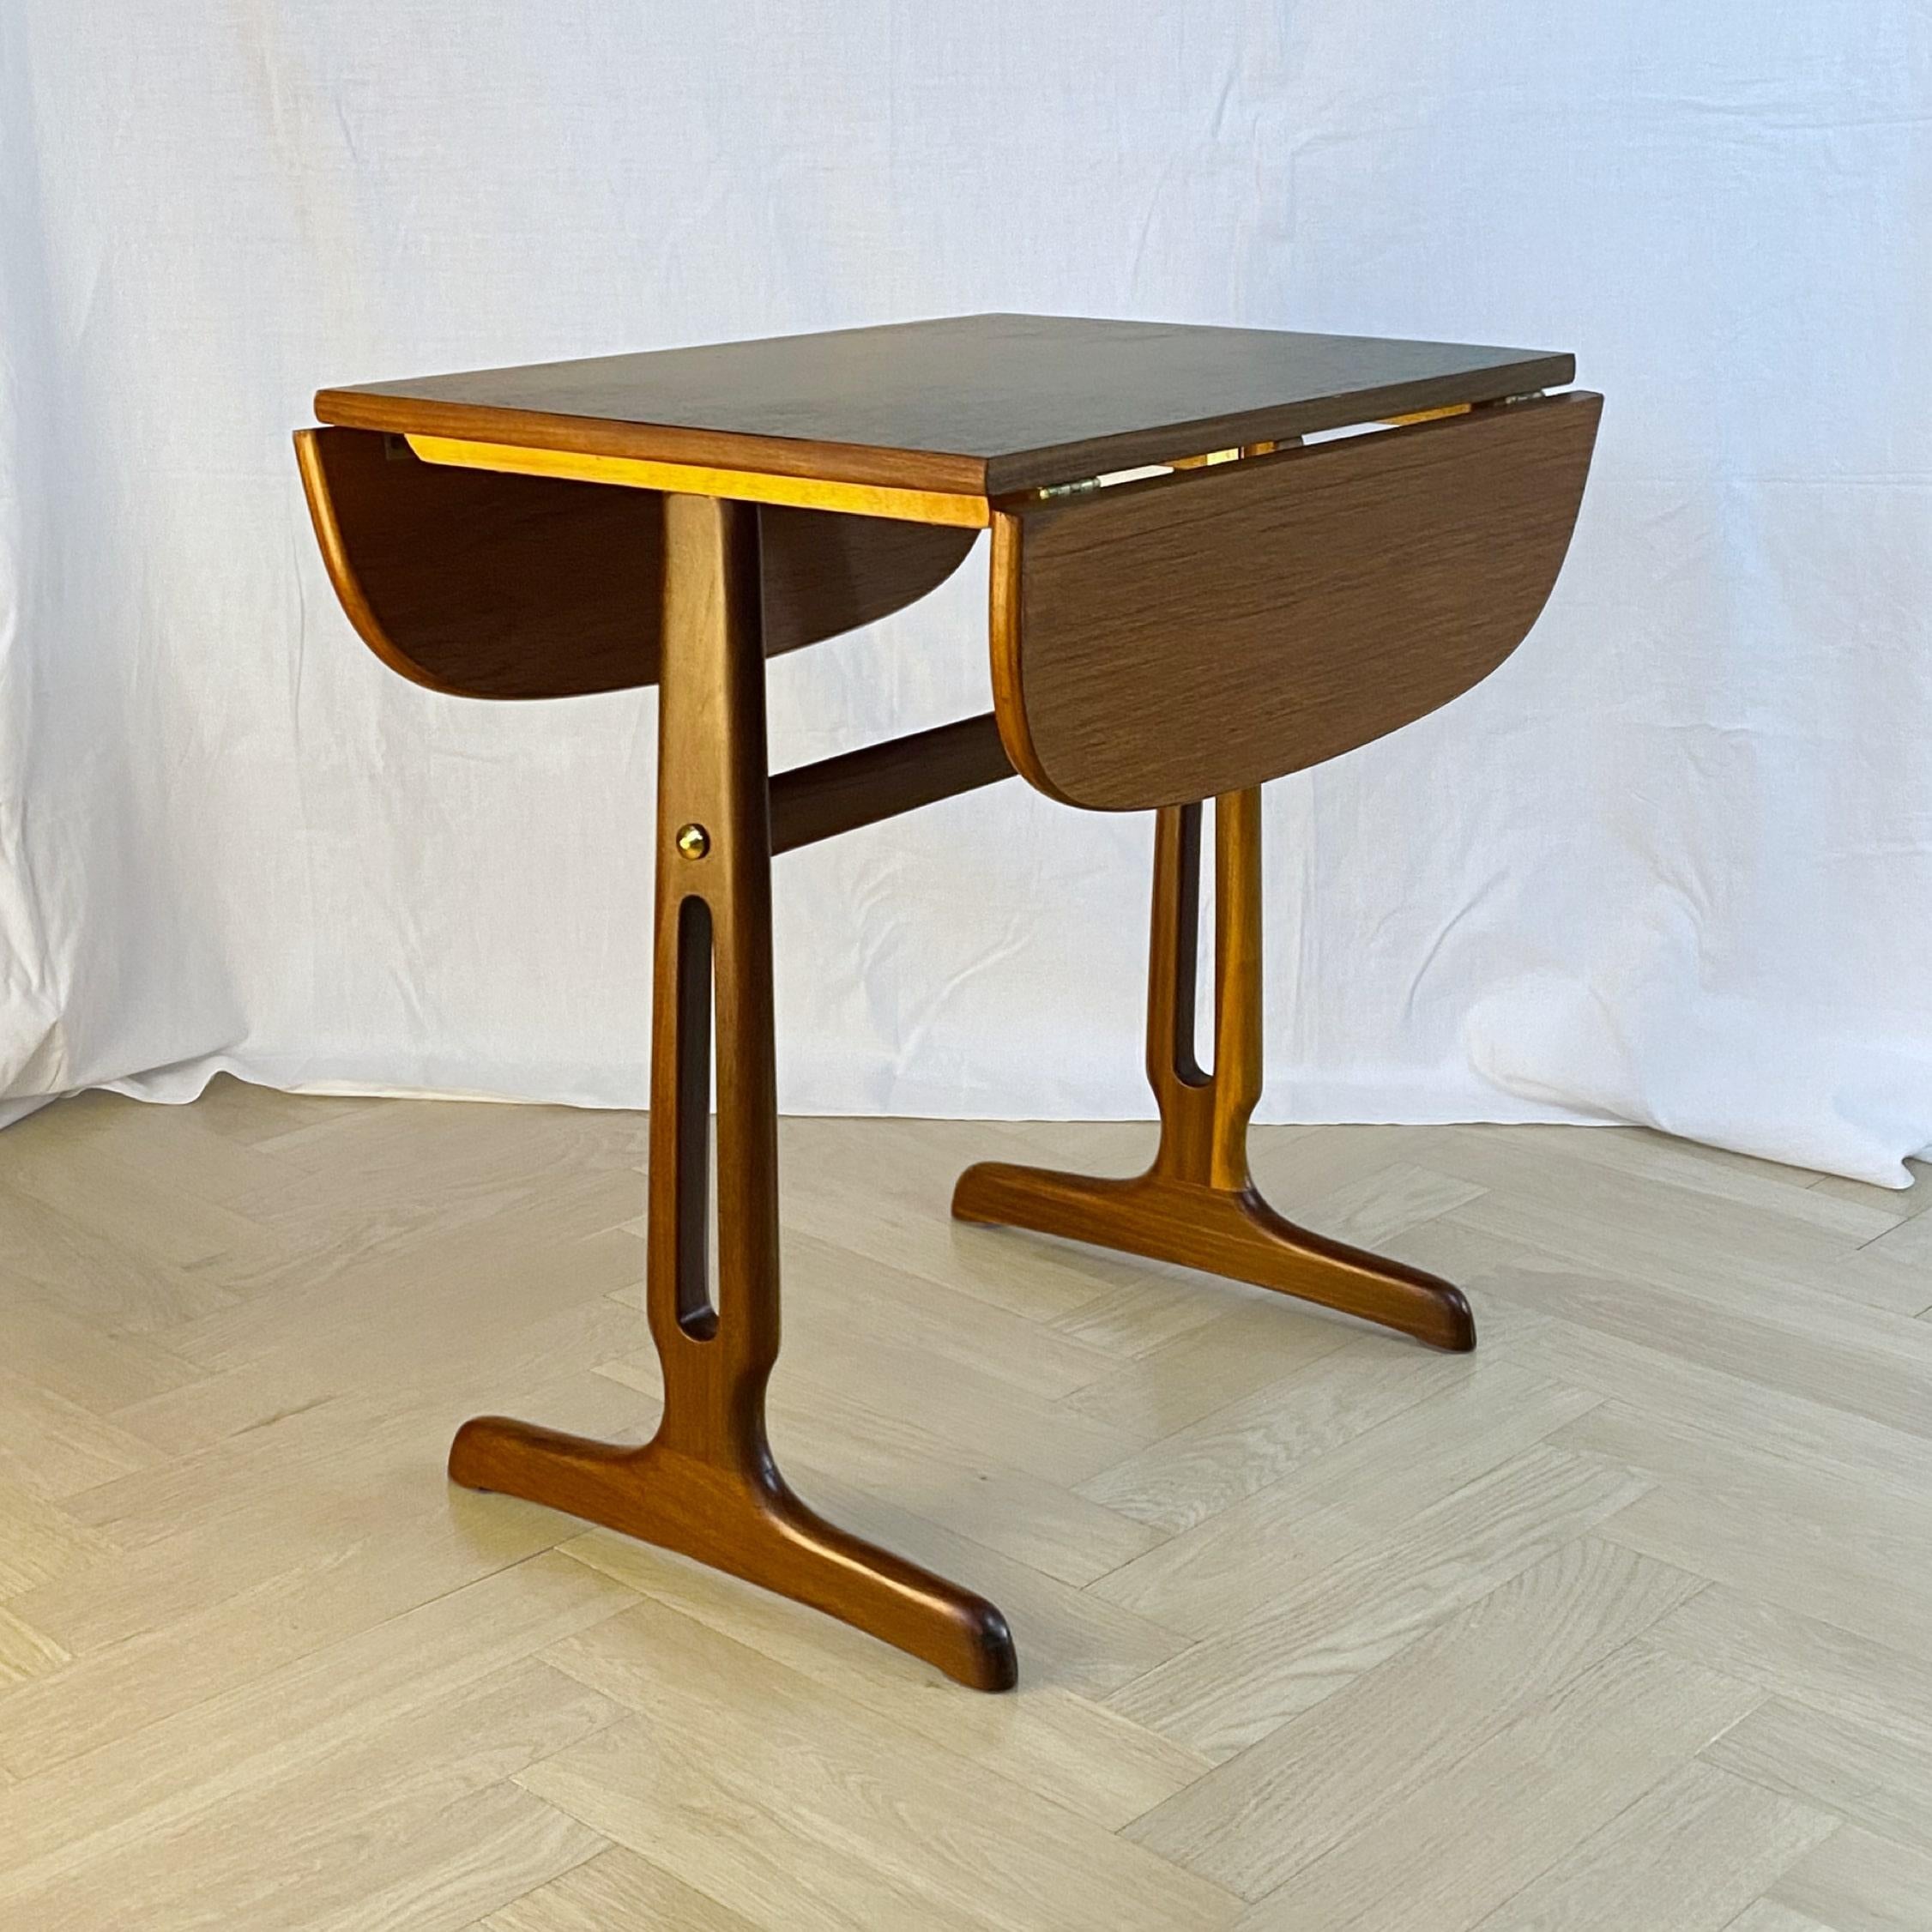 A neat drop-leaf side table or coffee table, made from solid teak and teak veneer with brass fittings. Slightly oval table top with black centerpiece resting on decorative legs. Produced by an unidentified Swedish manufacturer in the 1950s. Height